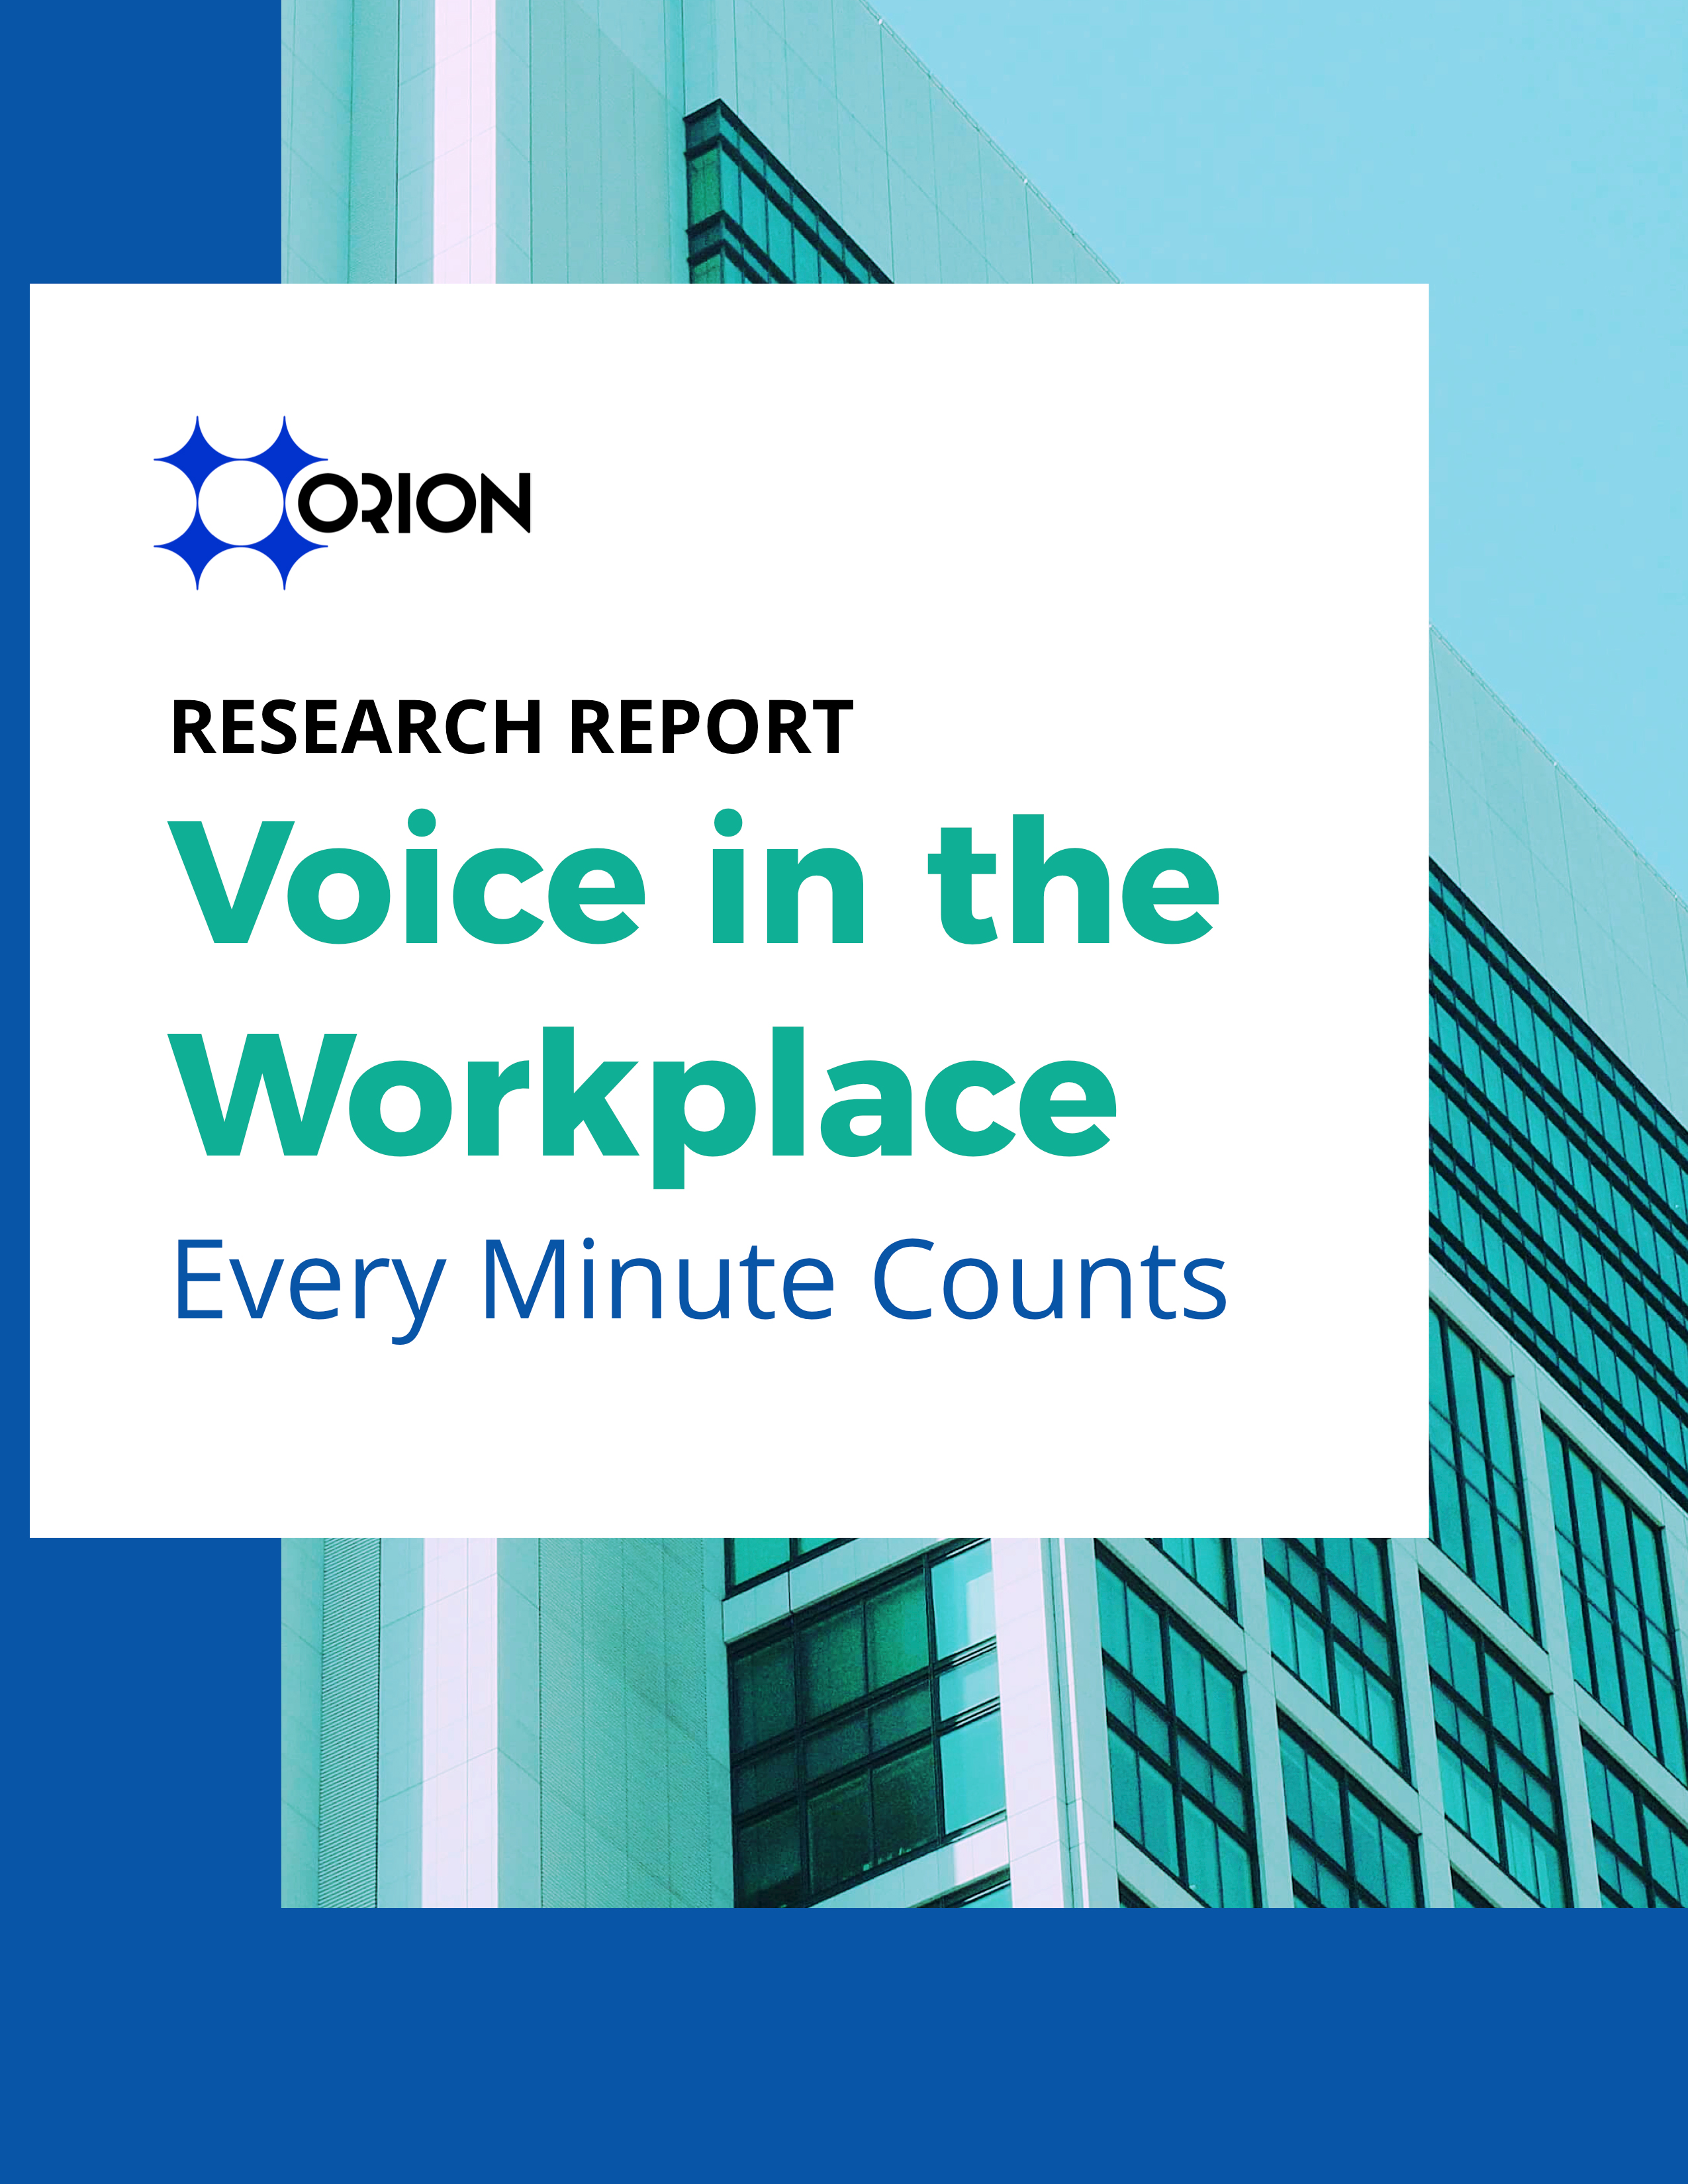 Voice-in-the-Workplace-Report-Cover